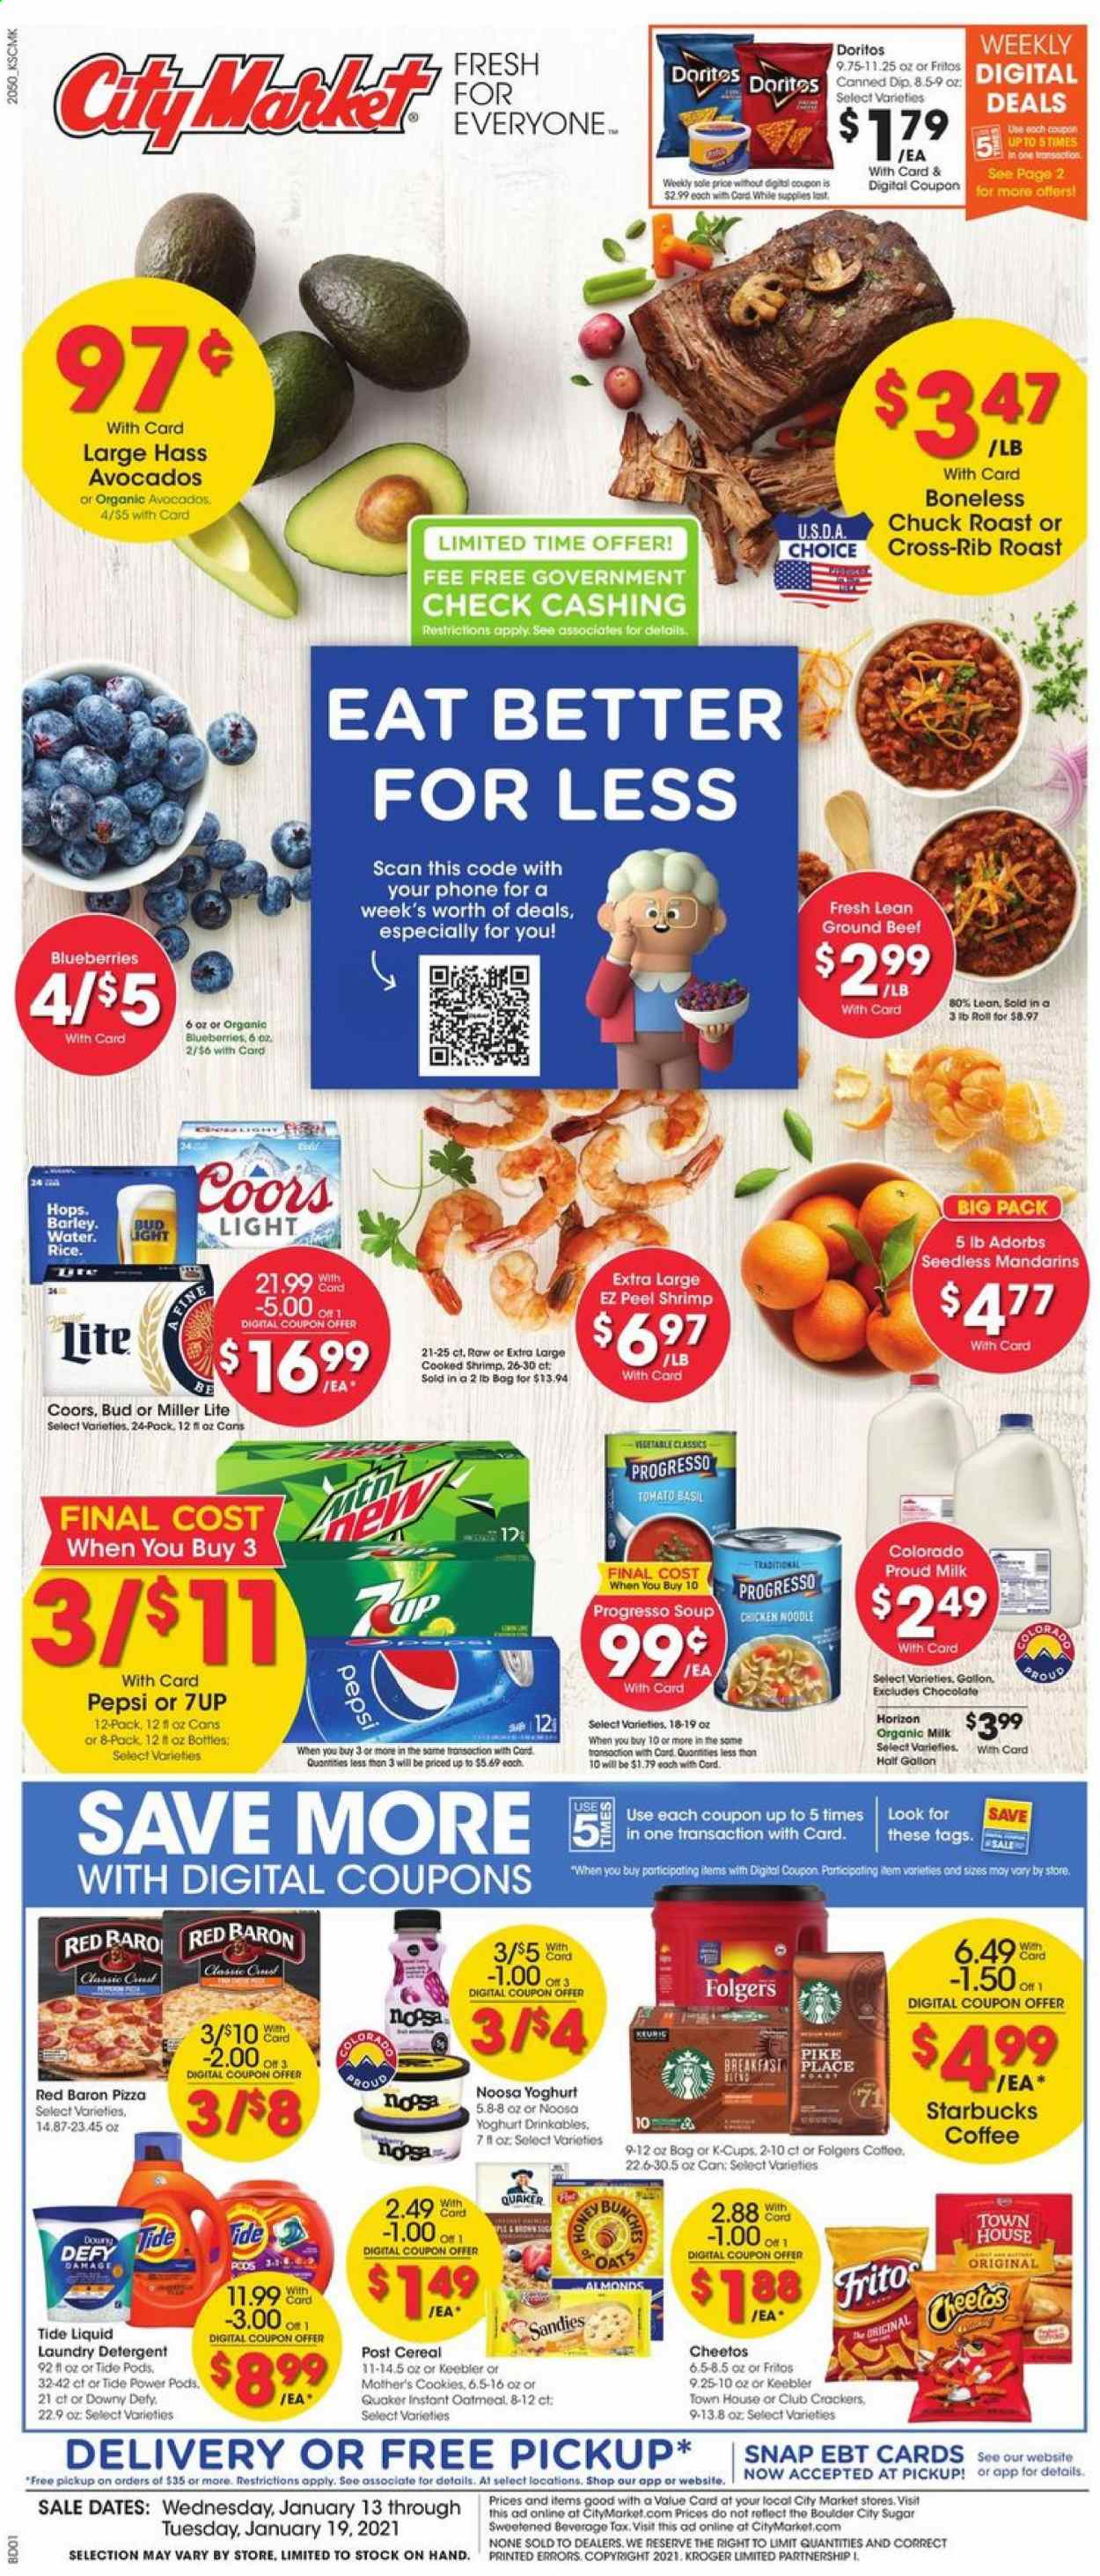 thumbnail - City Market Flyer - 01/13/2021 - 01/19/2021 - Sales products - blueberries, northern pike, shrimps, pizza, Quaker, Progresso, yoghurt, organic milk, dip, Red Baron, cookies, chocolate, Keebler, Doritos, Cheetos, sugar, oatmeal, oats, mandarines, cereals, Fritos, noodles, esponja, almonds, Pepsi, 7UP, coffee, Starbucks, Folgers, coffee capsules, K-Cups, beer, Miller Lite, Coors, Bud Light, beef meat, ground beef, chuck roast, detergent, Tide, laundry detergent. Page 1.